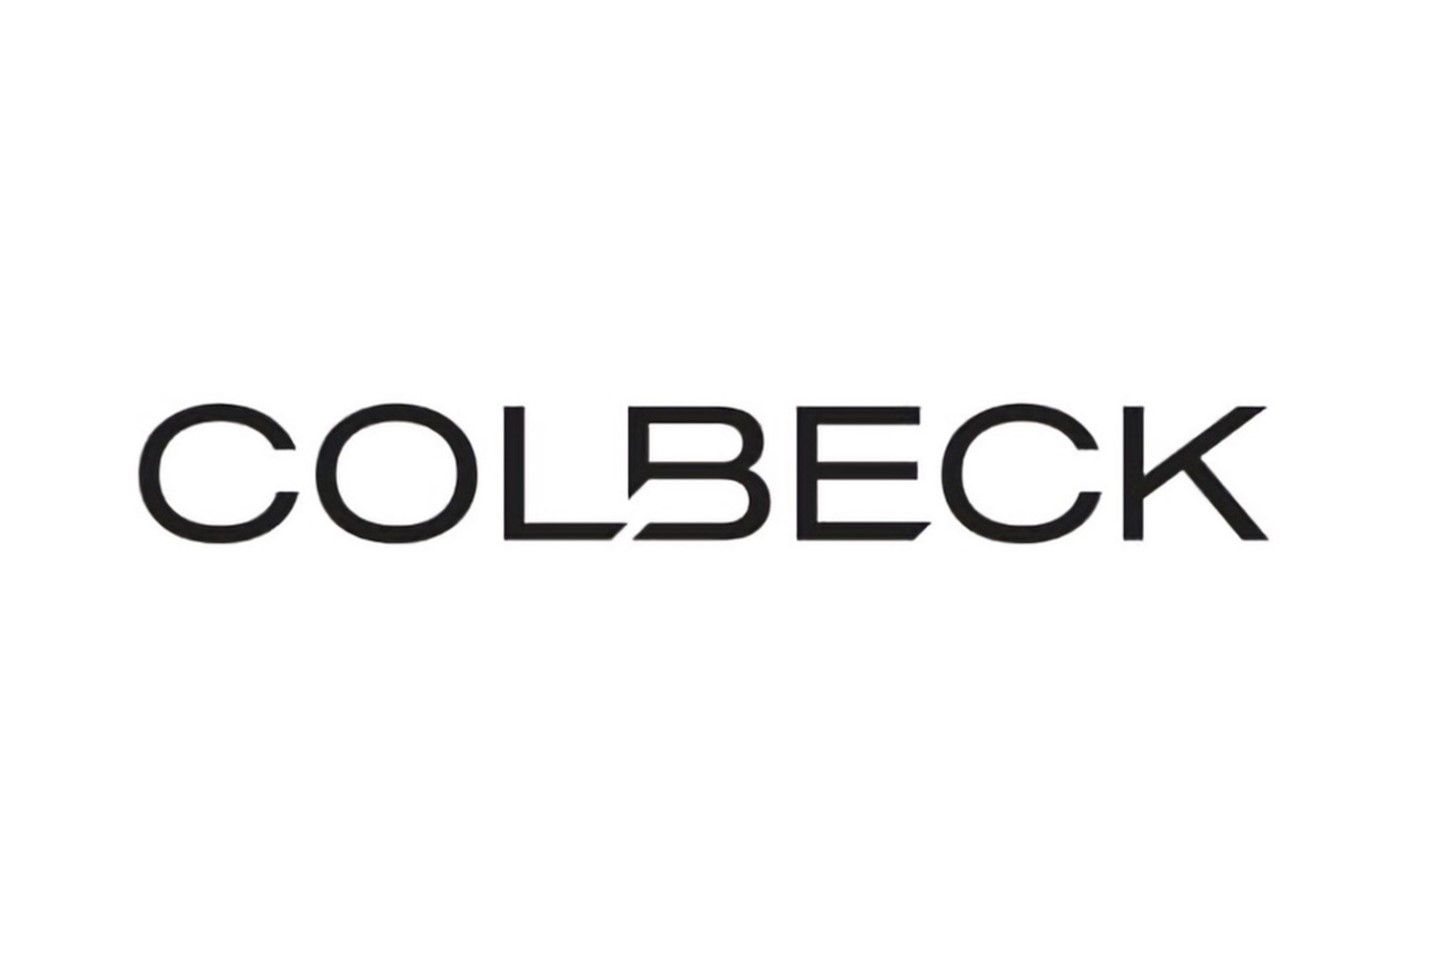 Colbeck Capital Management, Saturday, February 5, 2022, Press release picture